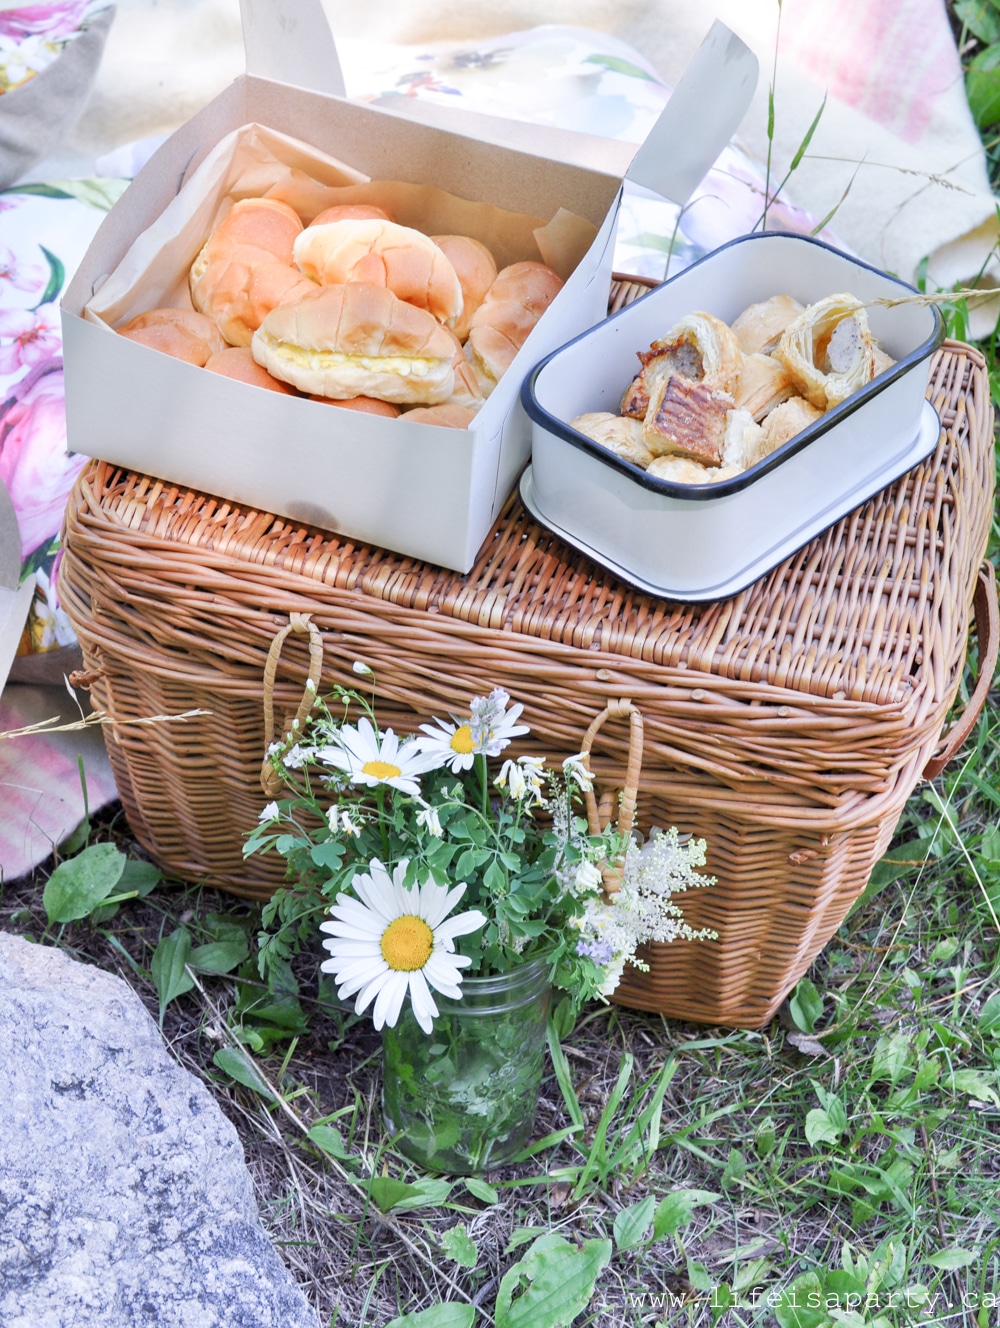 Picnic: our romantic English inspired picnic food menu includes tea sandwiches, home-made scotch eggs, scones and cream, shortbread, empire cookies, custard creams, vintage decor and lots and lots of tea.